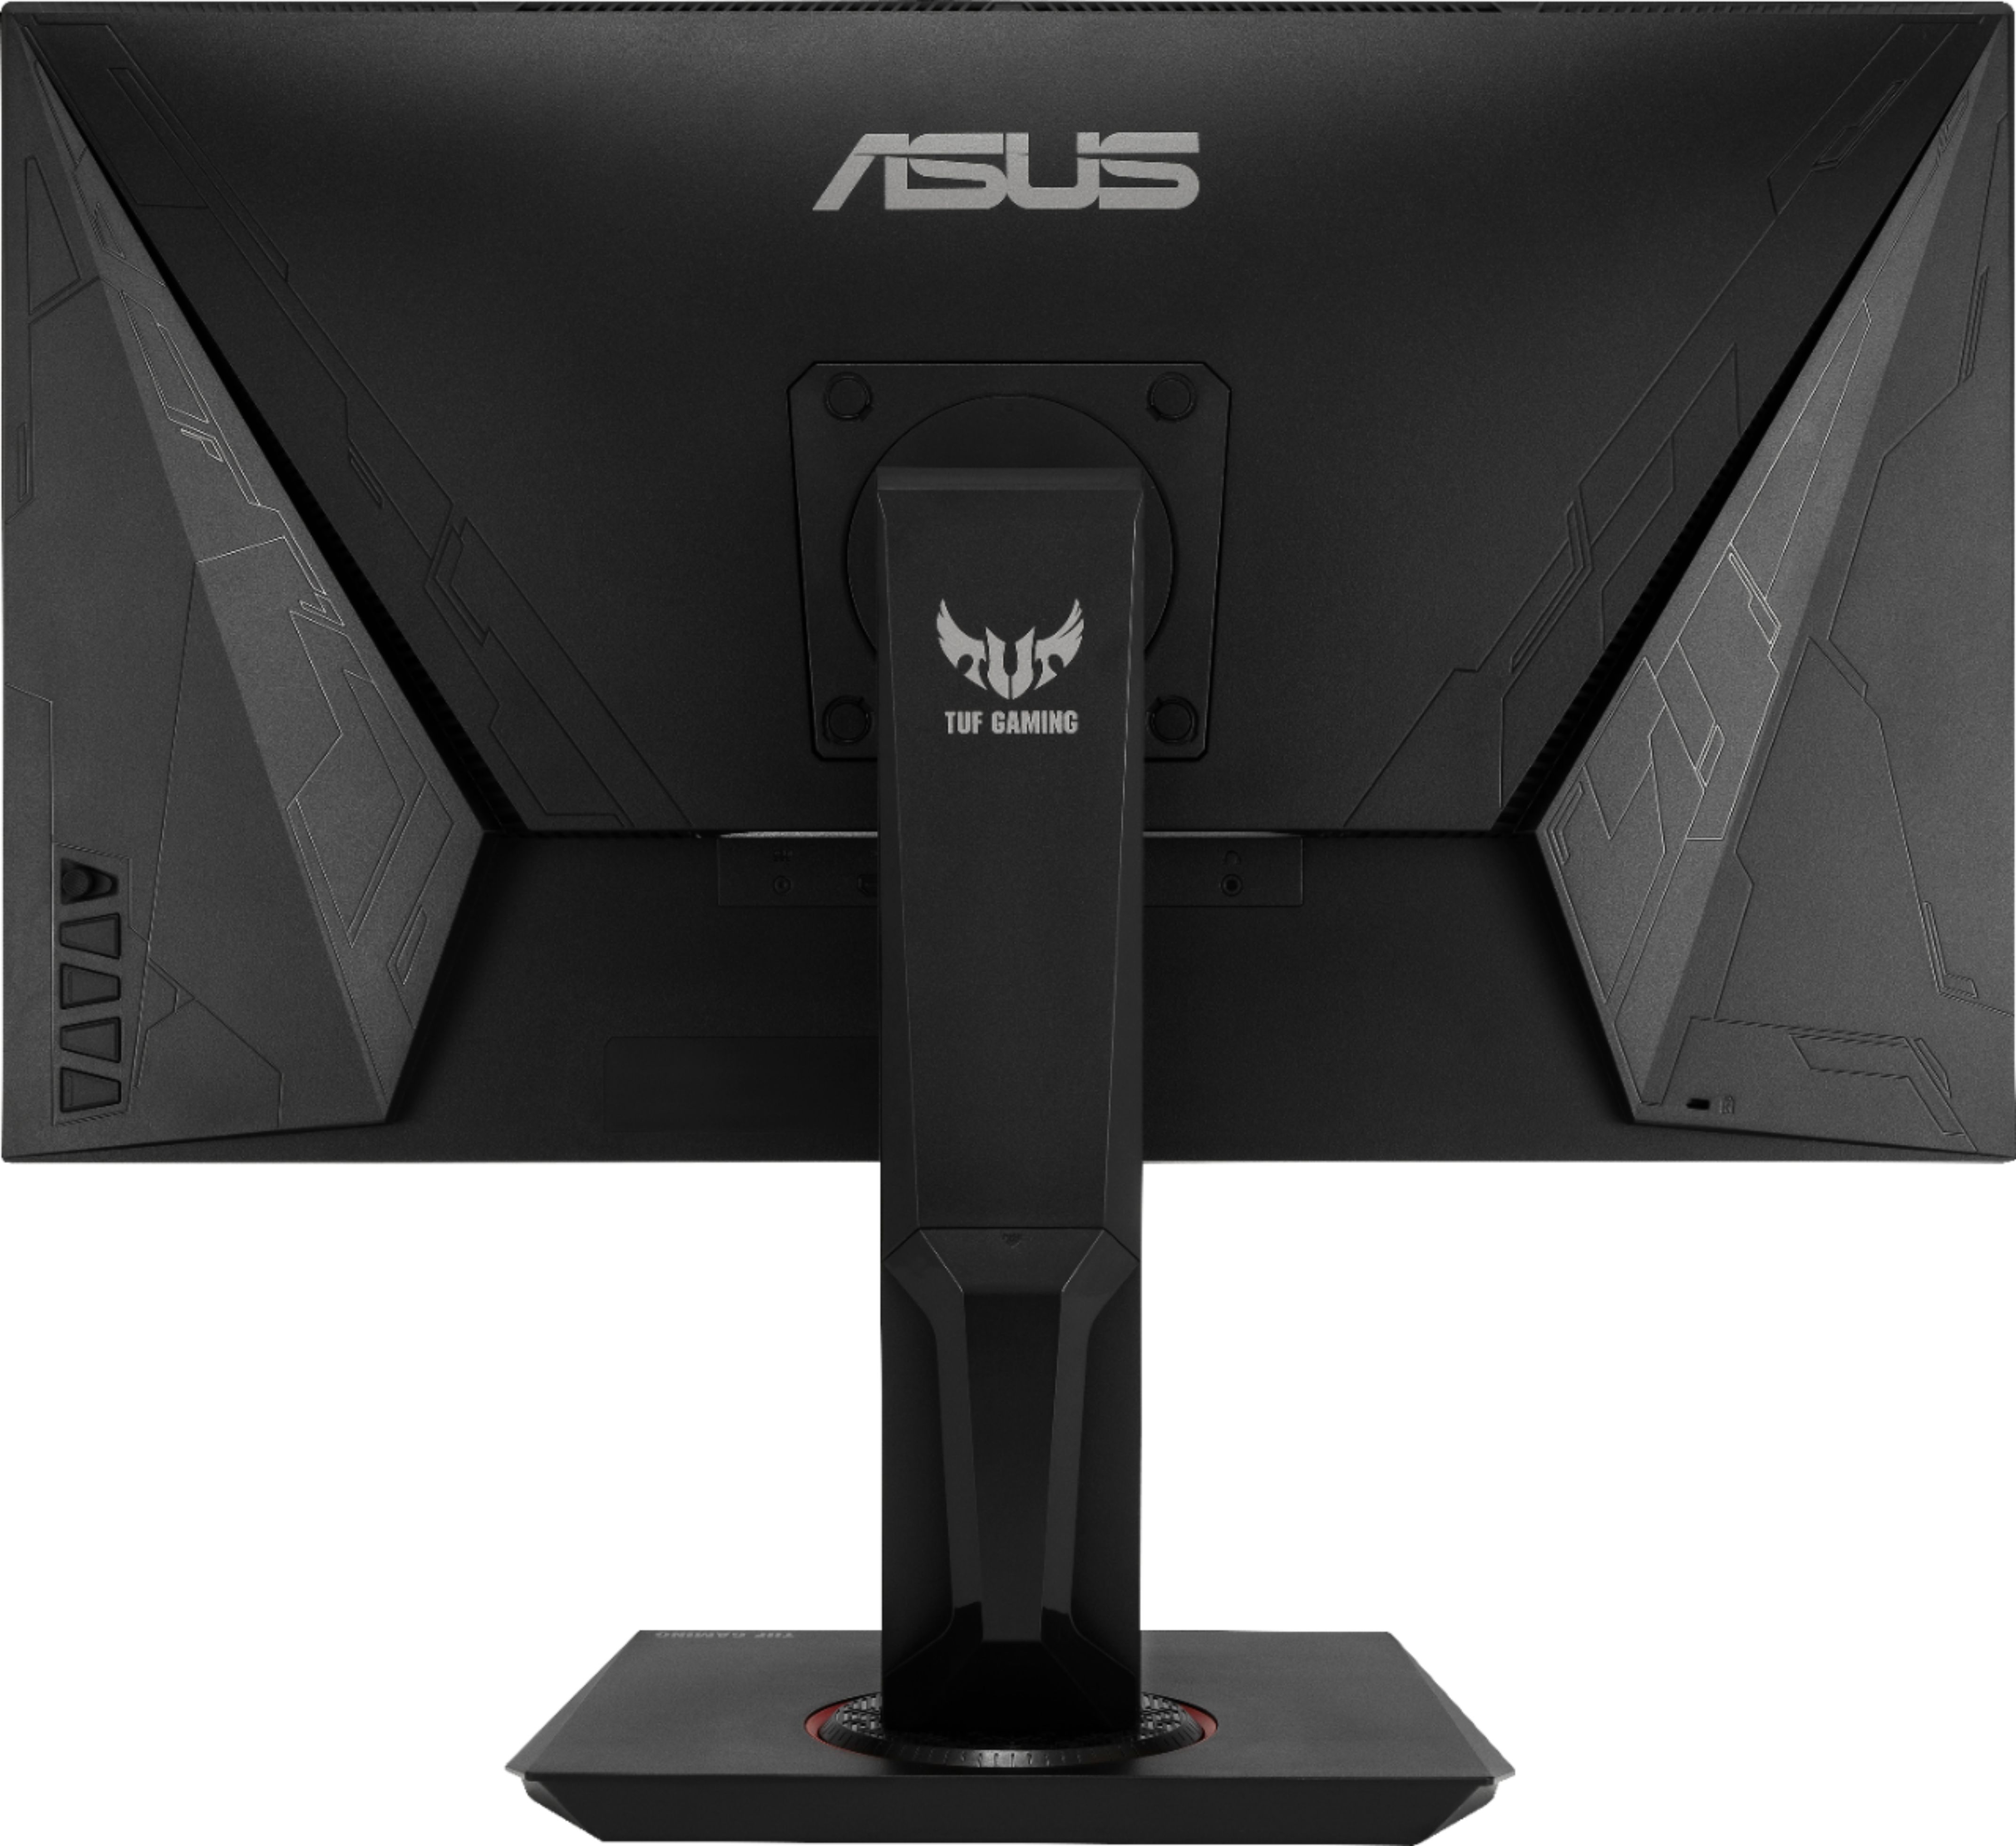 Back View: ASUS - Geek Squad Certified Refurbished TUF Gaming 28" IPS LED 4K UHD FreeSync Monitor with HDR - Black